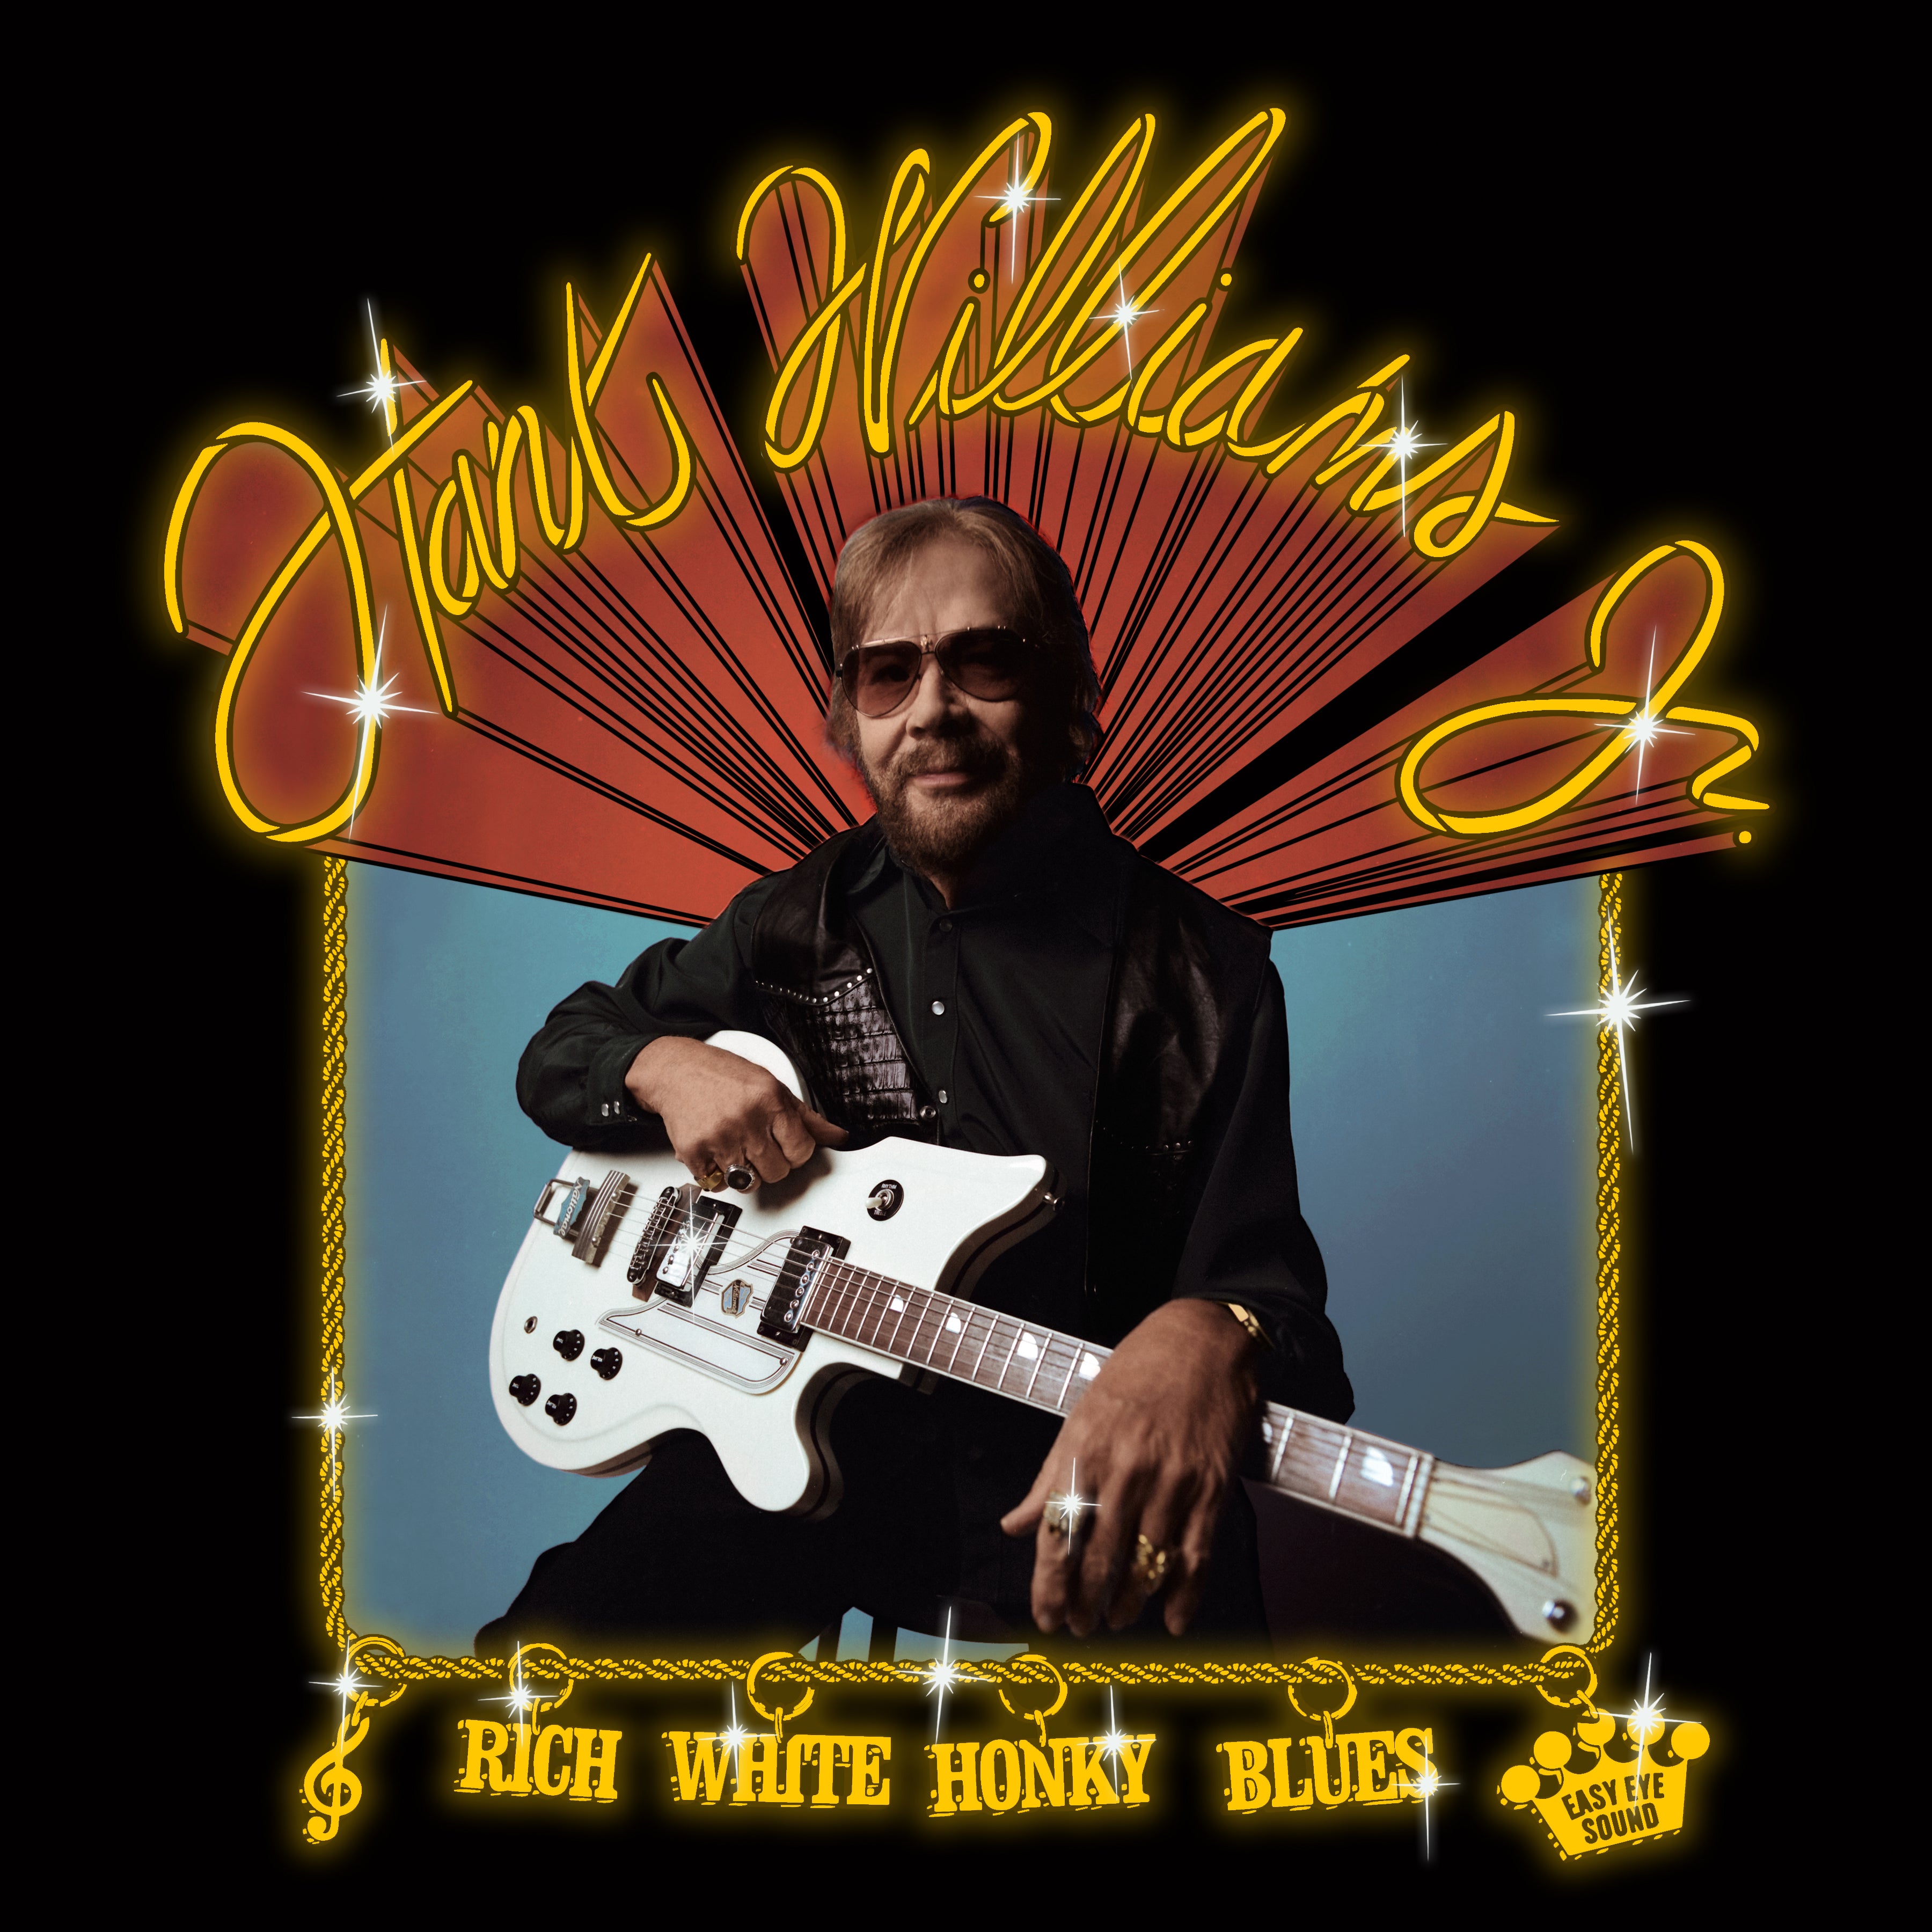 The new album from Hank Williams, Jr. is available now!